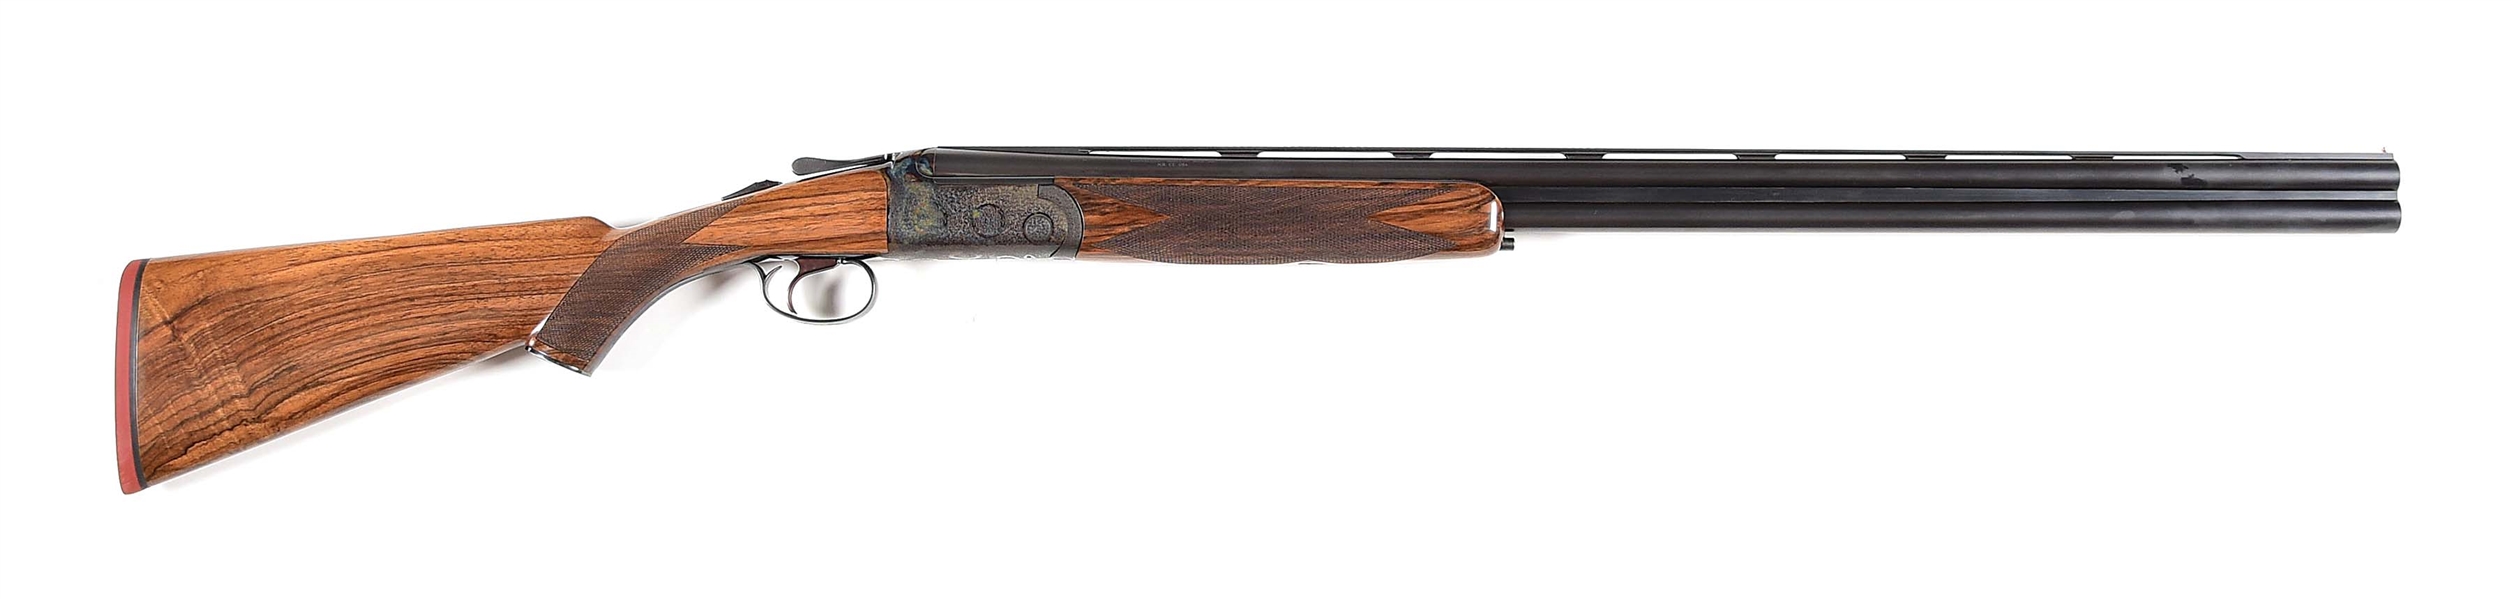 (M) 20 GAUGE CSMC "INVERNESS" OVER UNDER SINGLE TRIGGER EJECTOR SHOTGUN WITH CHOKE TUBES AND WRENCH.